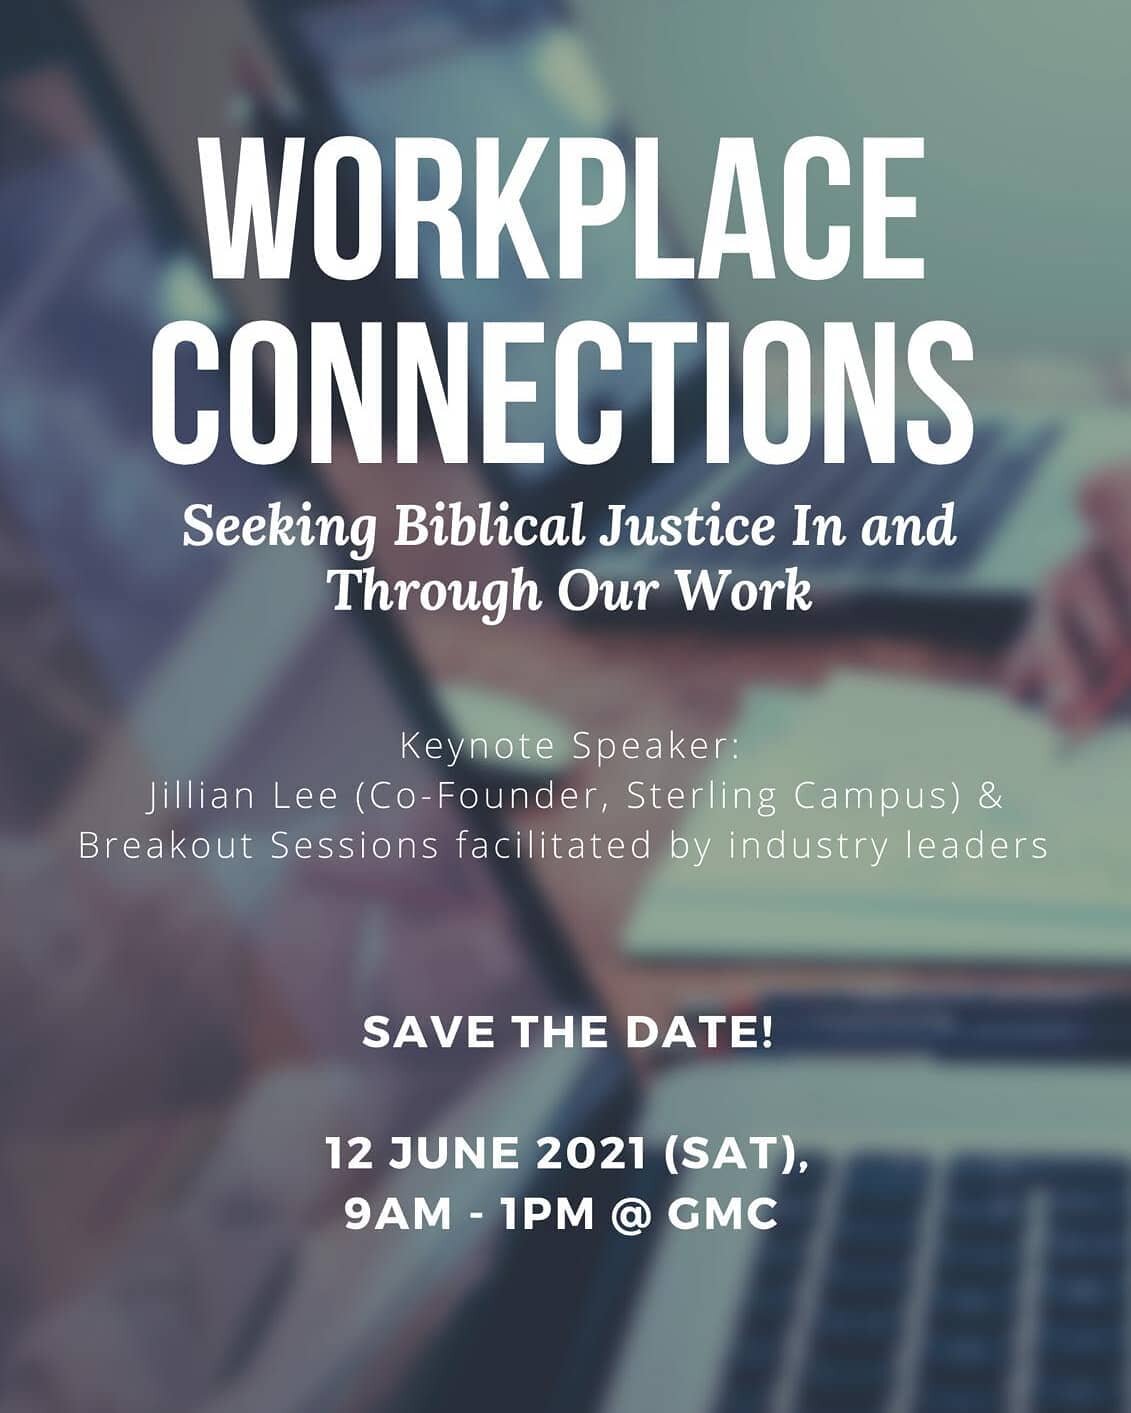 🤔 I'm not in a &quot;helping&quot; sector like social work or teaching or healthcare. How could justice look like in my workplace?
😅 I'm the lowest lifeform in my workplace. Where do I even begin talking about justice? 

🧐 Come and explore what it